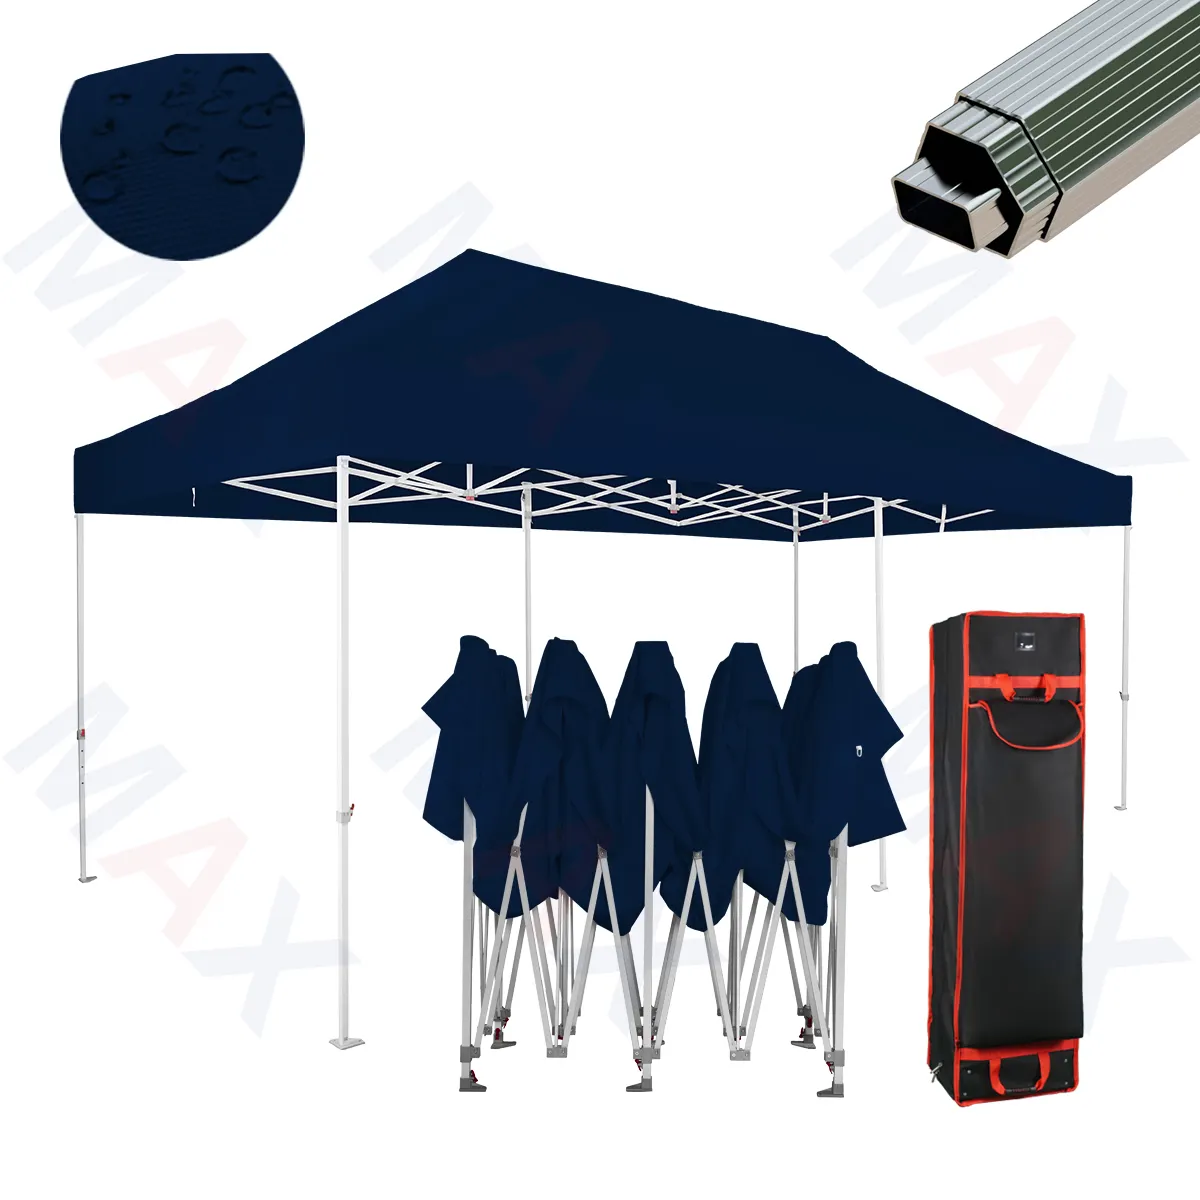 Custom Printed Canopy Aluminium Exhibition Tents 10x20 With Heavy-Duty Aluminum Frame & Tablecloth, Banner Stand, Feather Flag